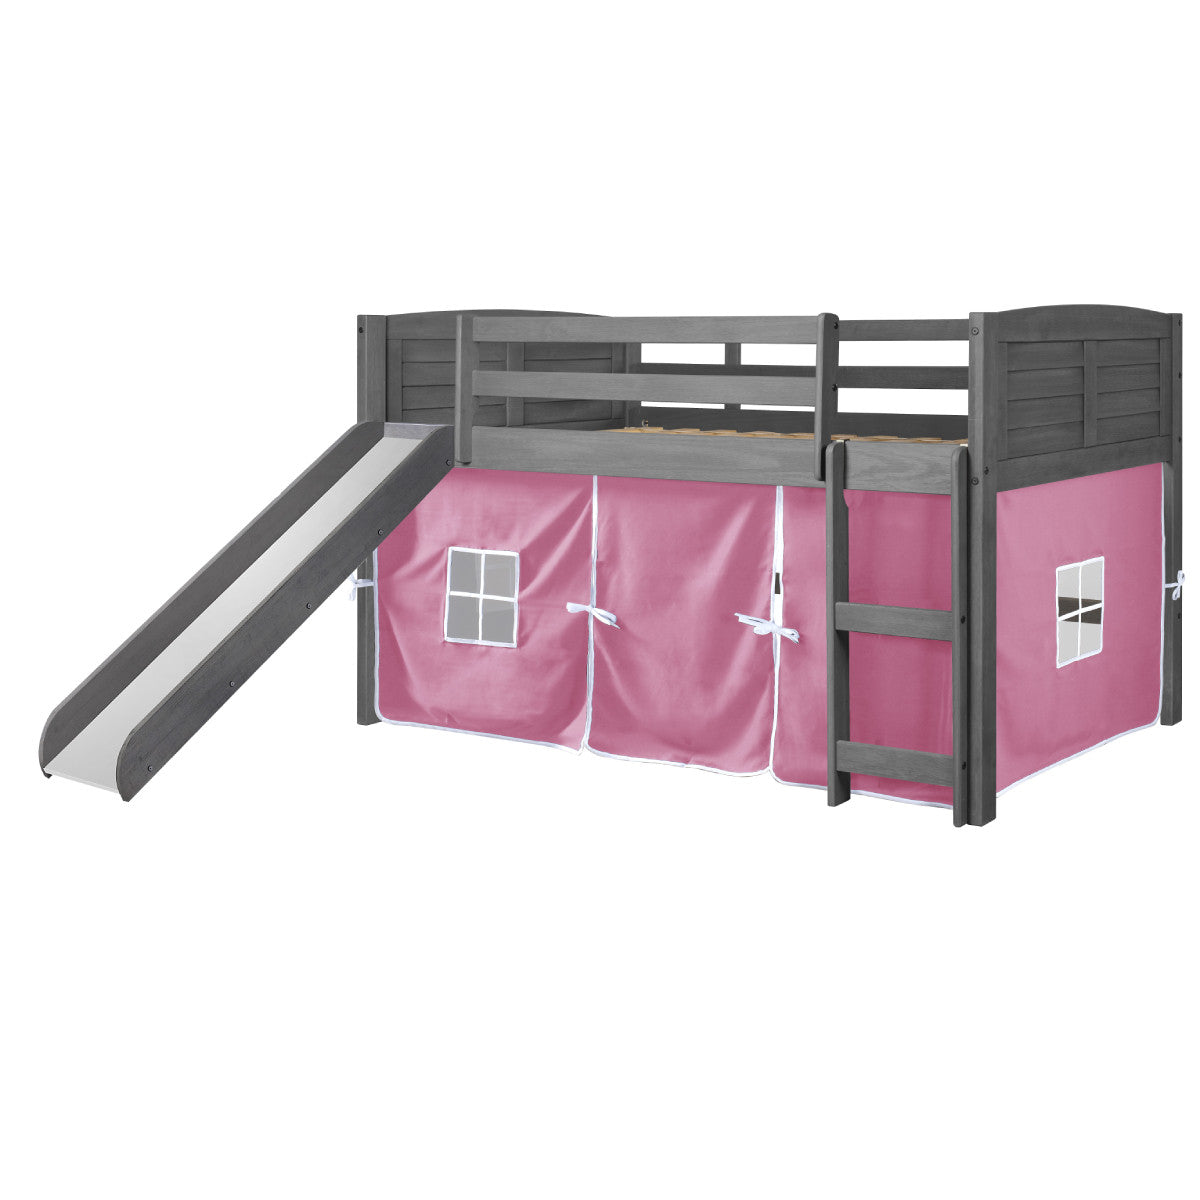 TWIN LOUVER LOW LOFT W/SLIDE & PINK TENT KIT IN ANTIQUE GREY FINISH